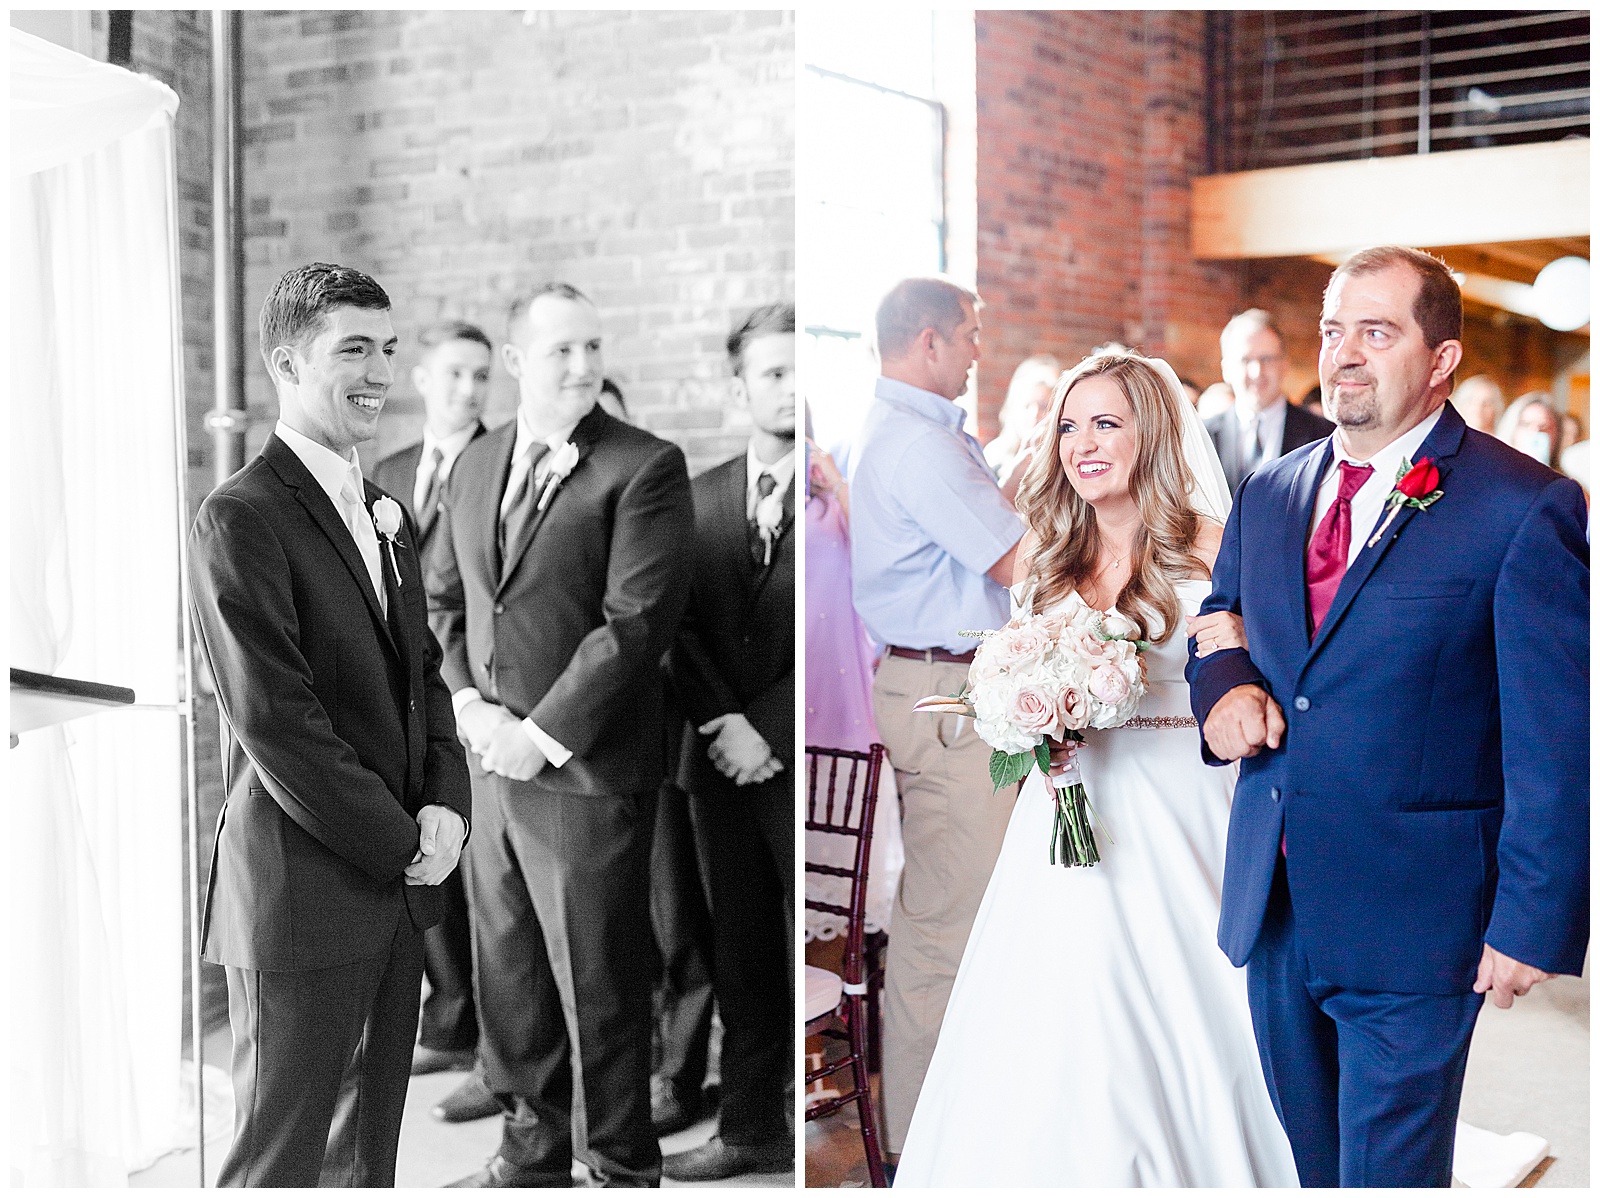 Dad walks bride down the aisle in stunning indoor venue in Charlotte, NC at Summer Wedding | Check out the full wedding at KevynDixonPhoto.com